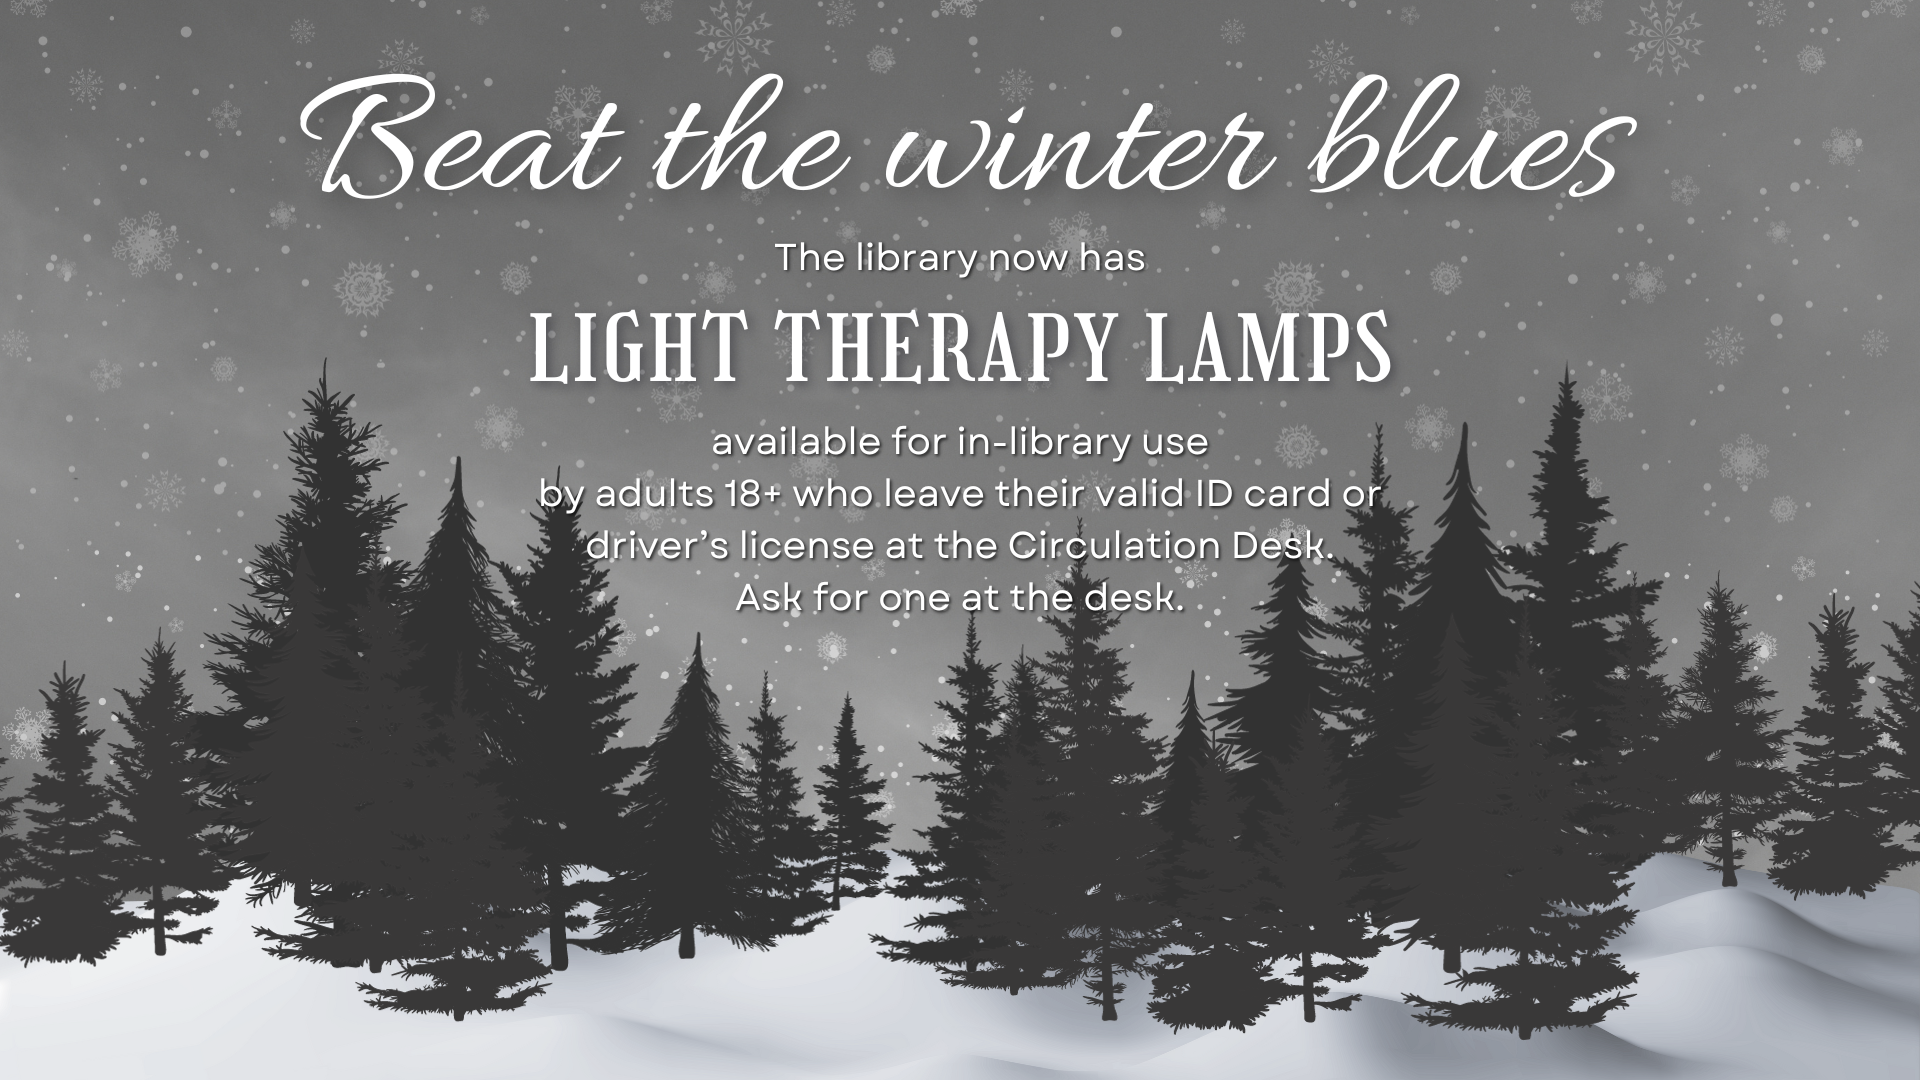 The library has light therapy lamps available for in-library use by adults 18+. Ask for more info at the Circulation Desk.